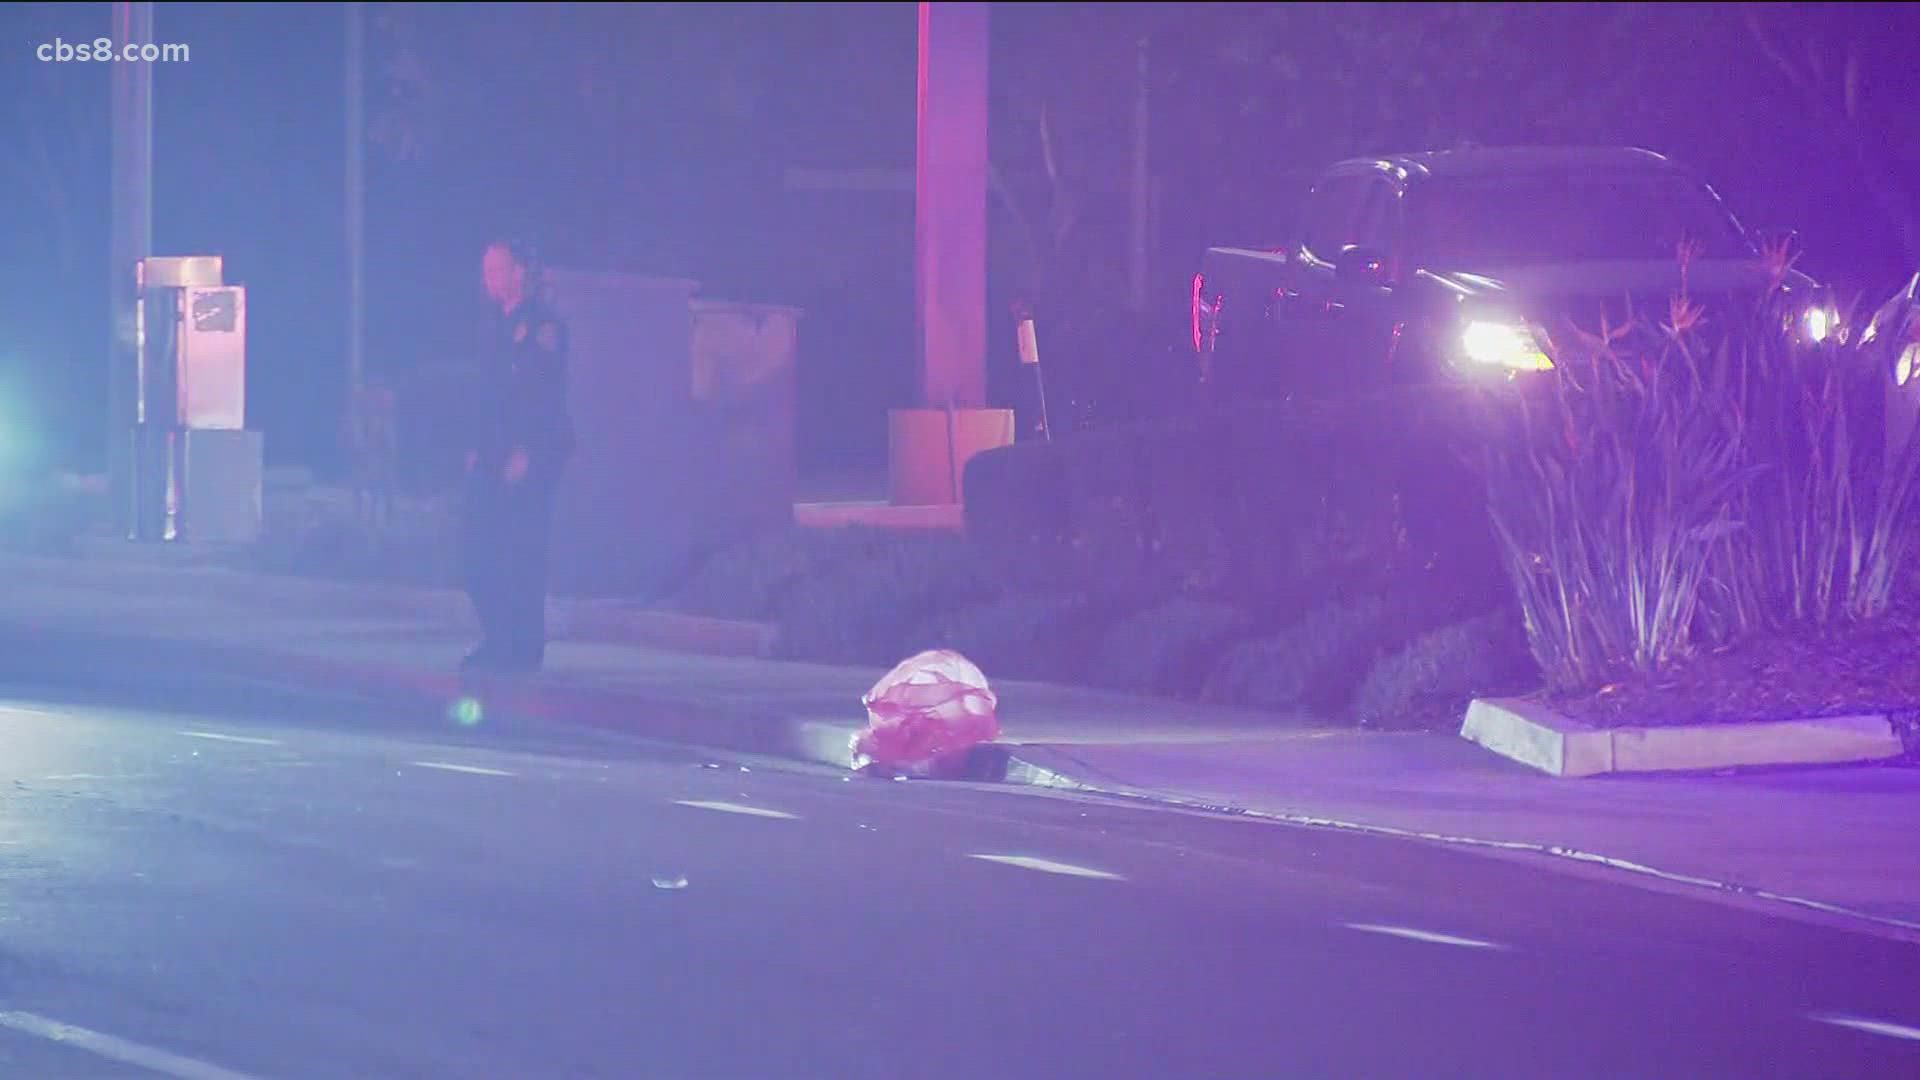 Authorities are searching for a driver they say is responsible for a hit and run, killing a man in Linda Vista on Friday night.